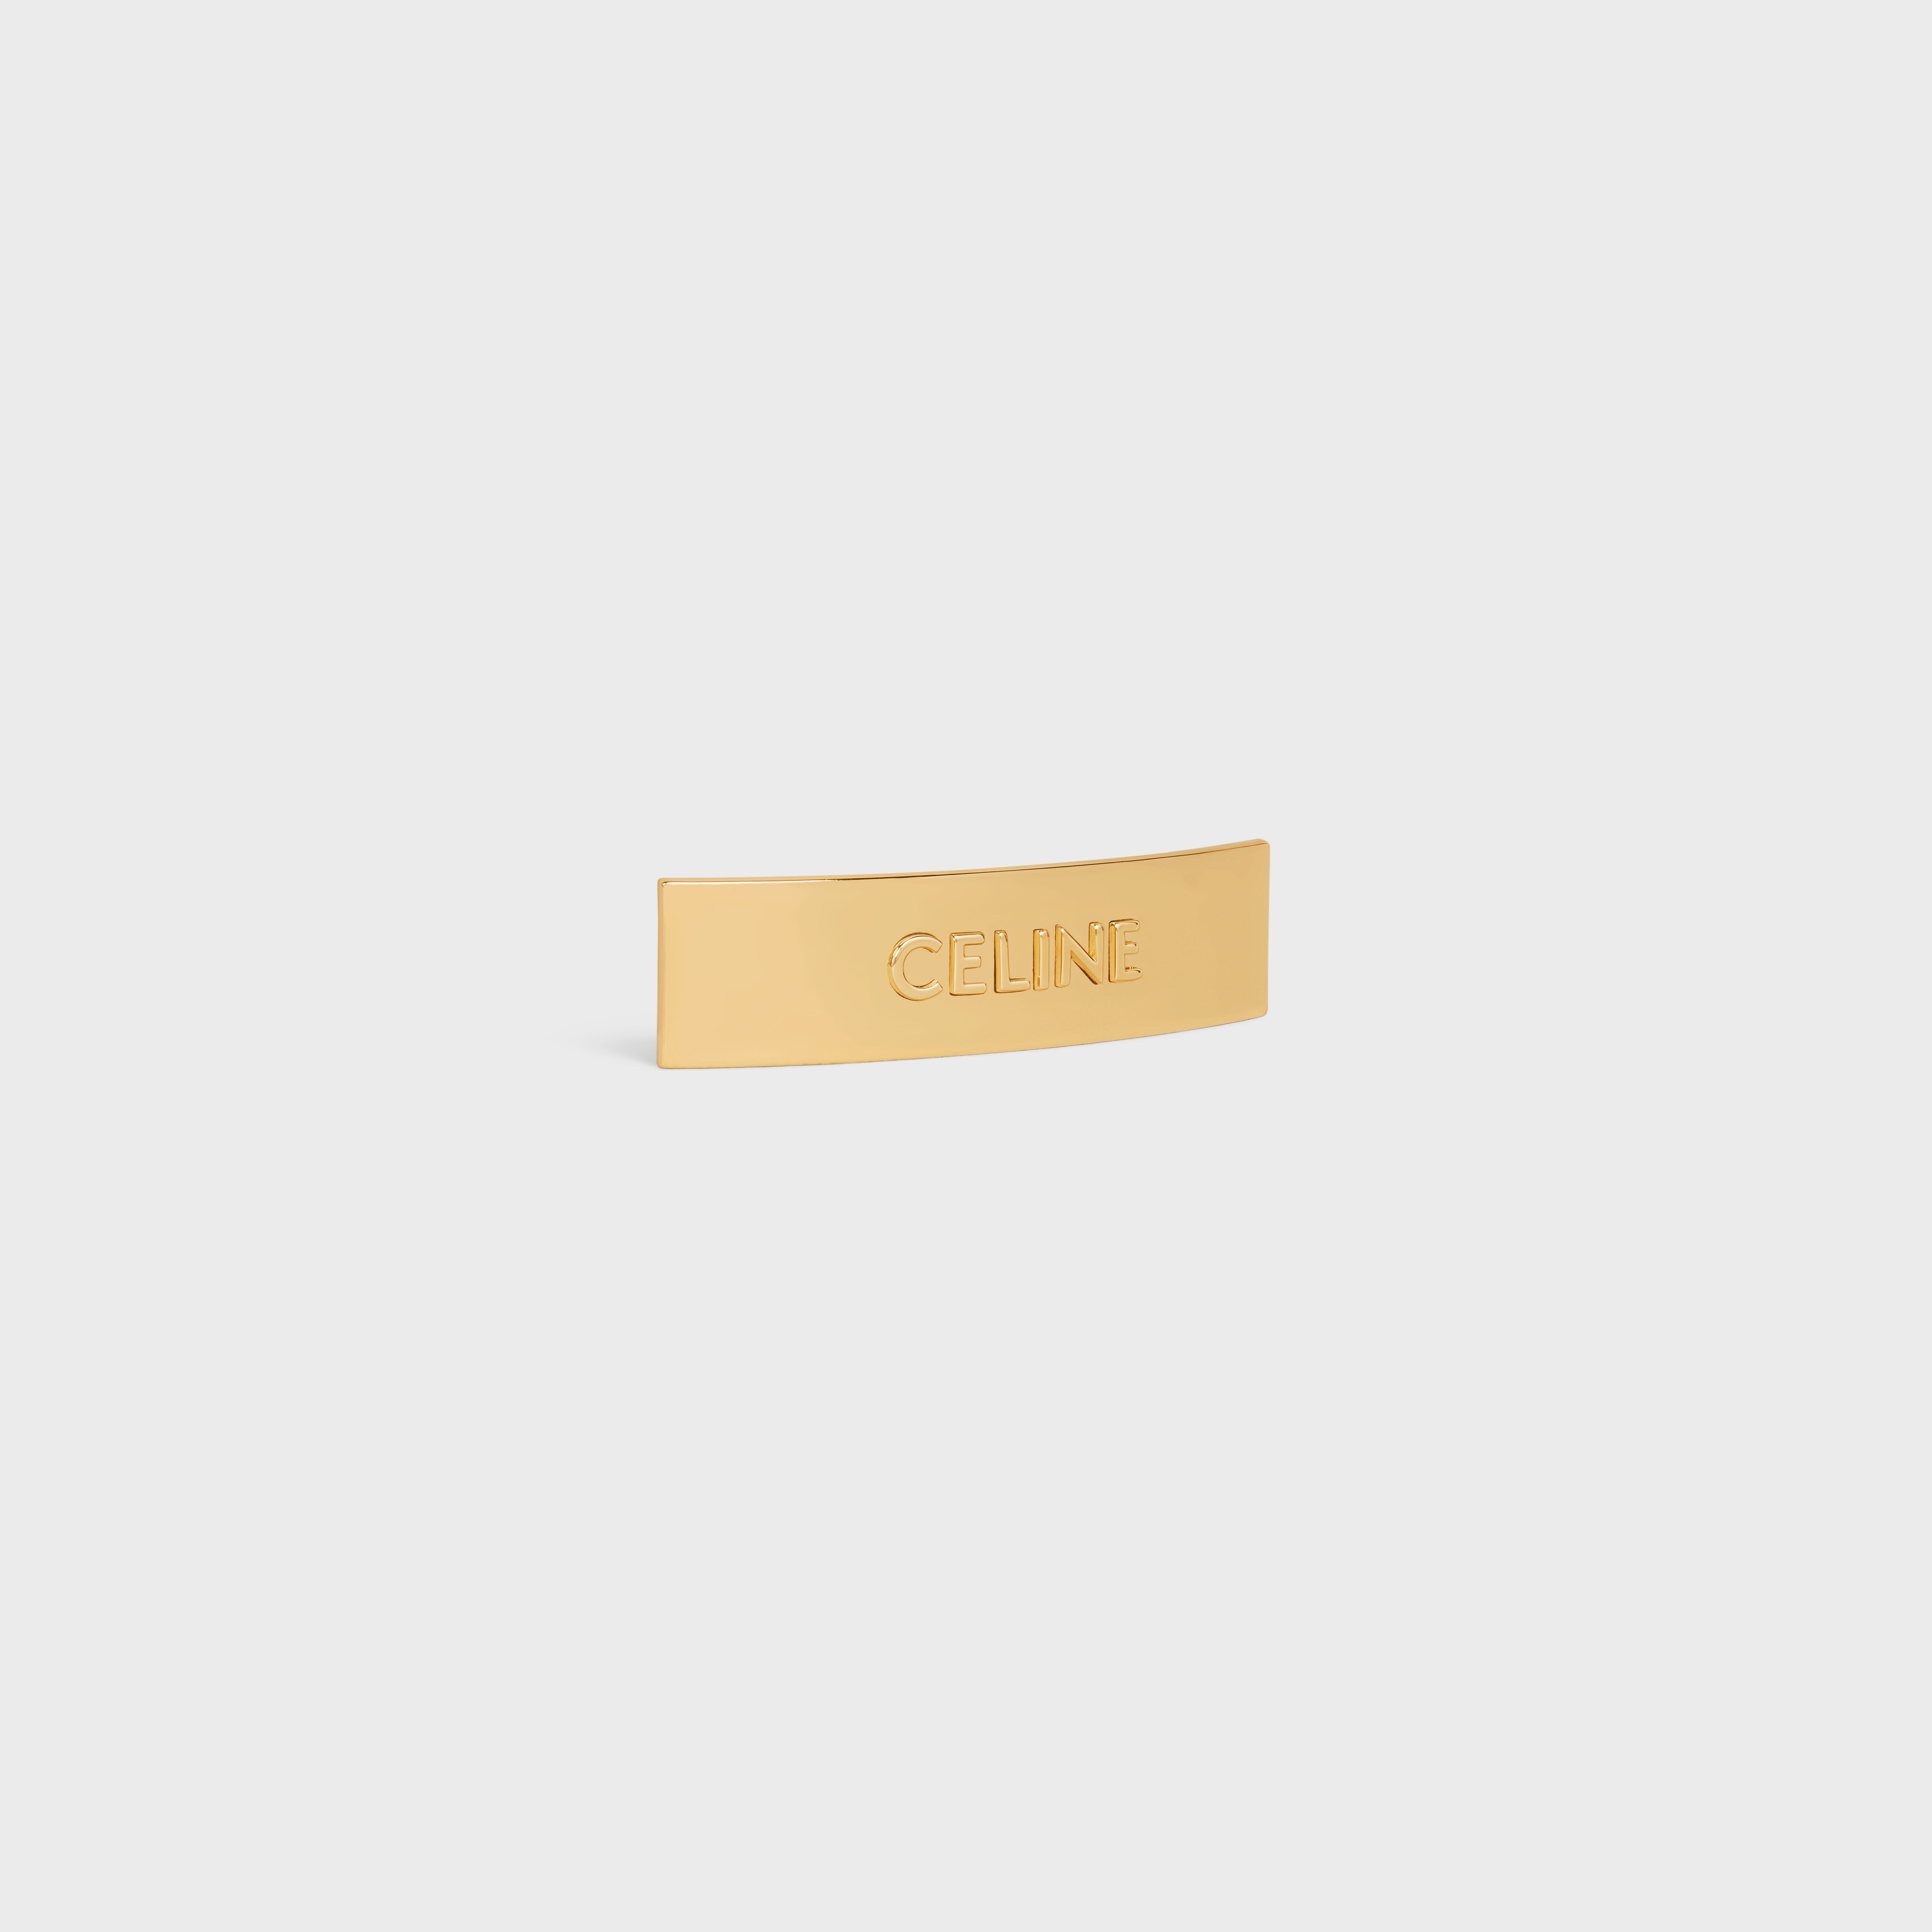 Celine Hair Clip in Brass and Steel with Gold Finish - 2